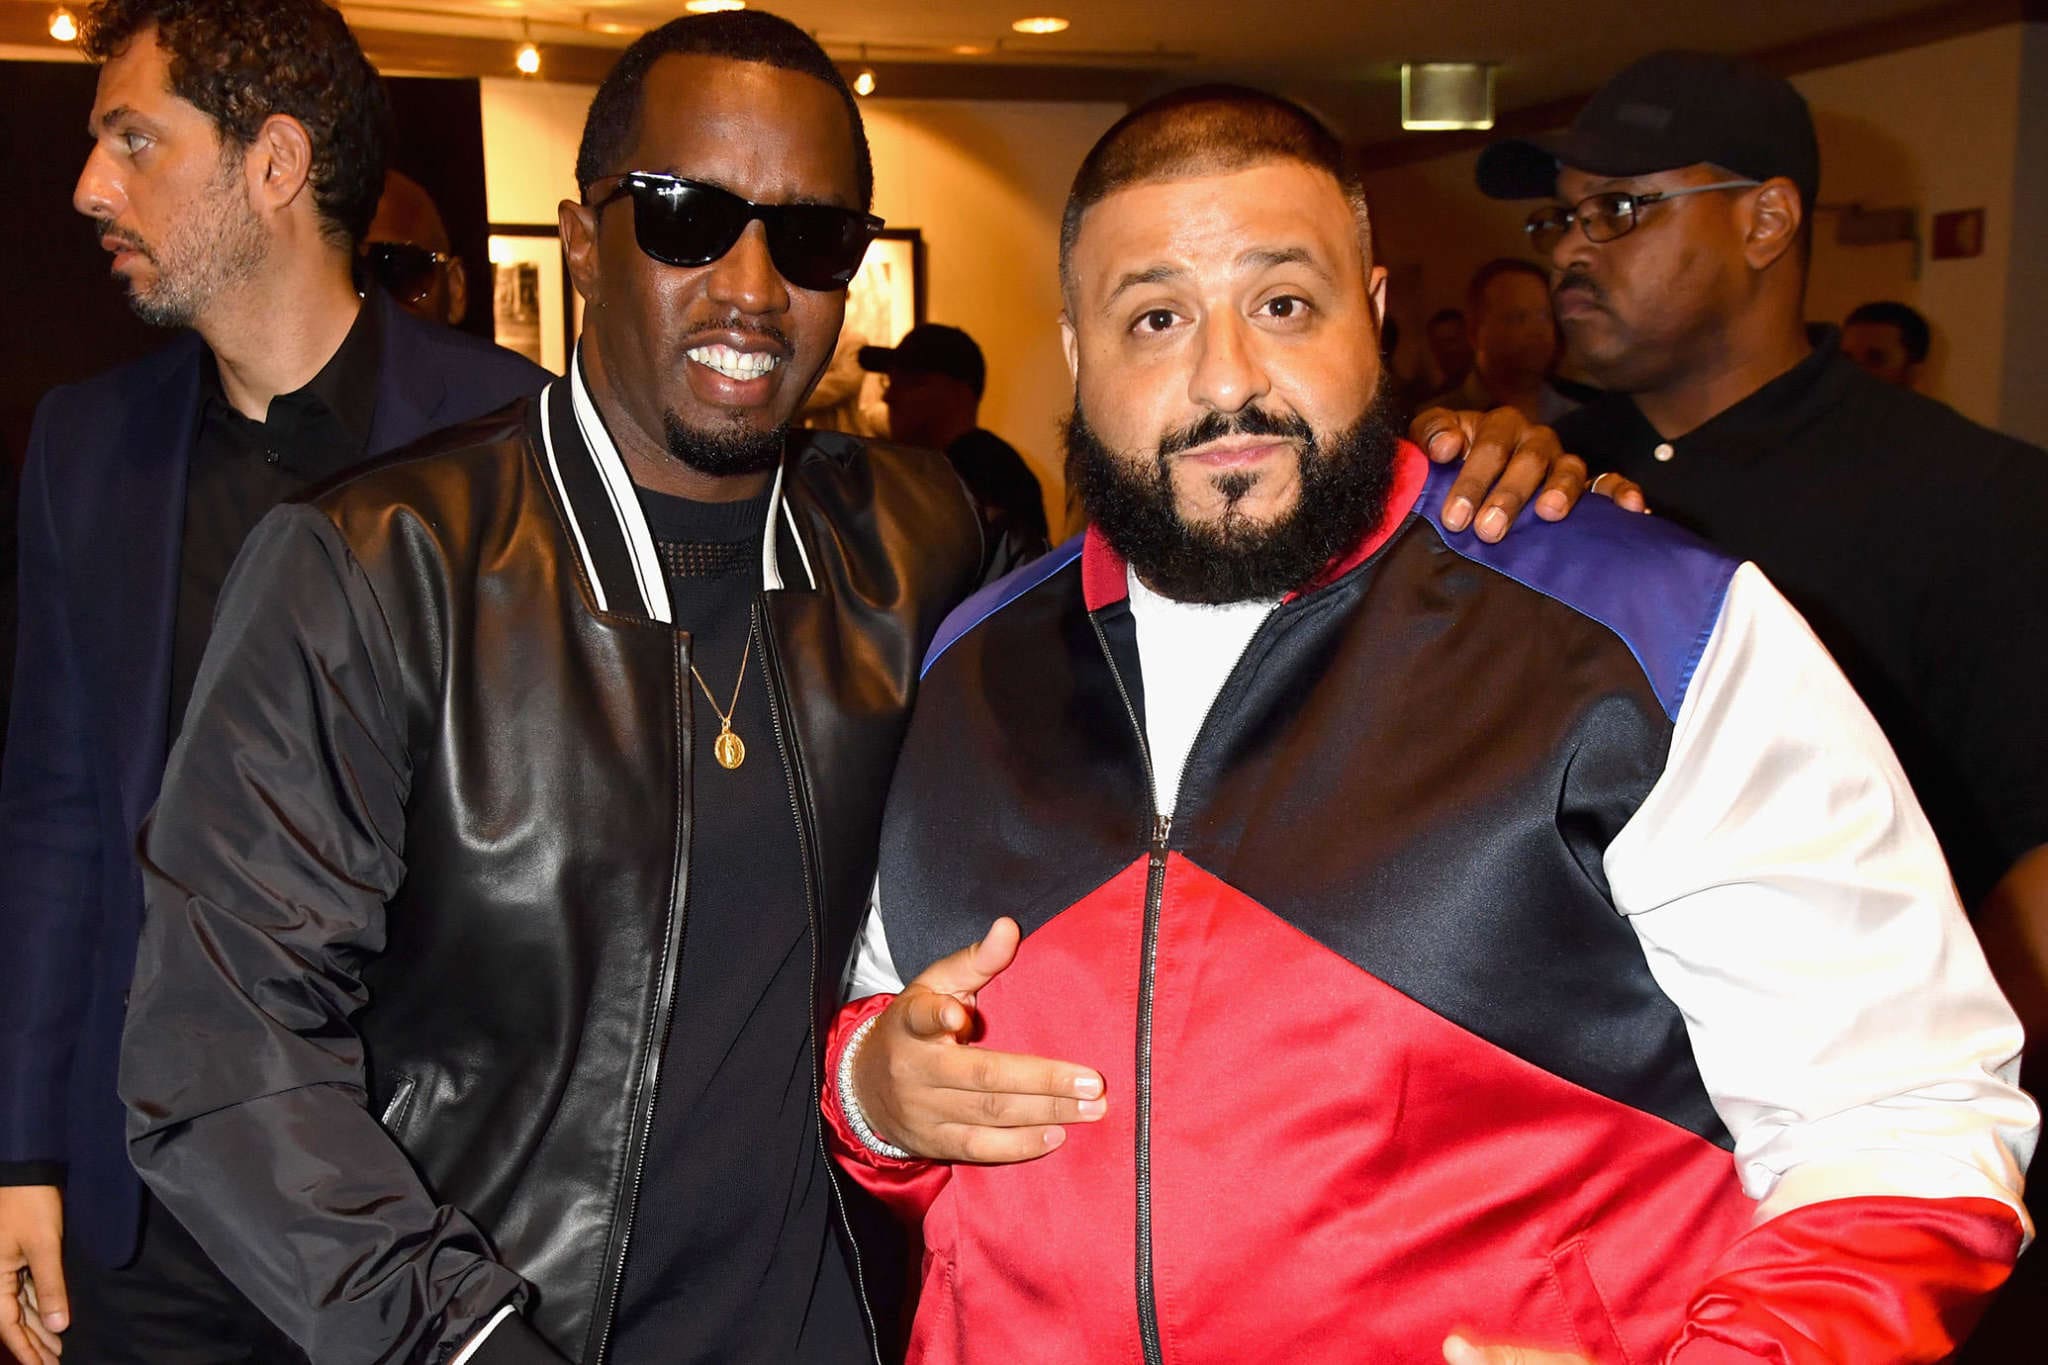 Diddy Confirmed 'Making The Band' In 2020 - He's In 'Semi-Retirement' From Music